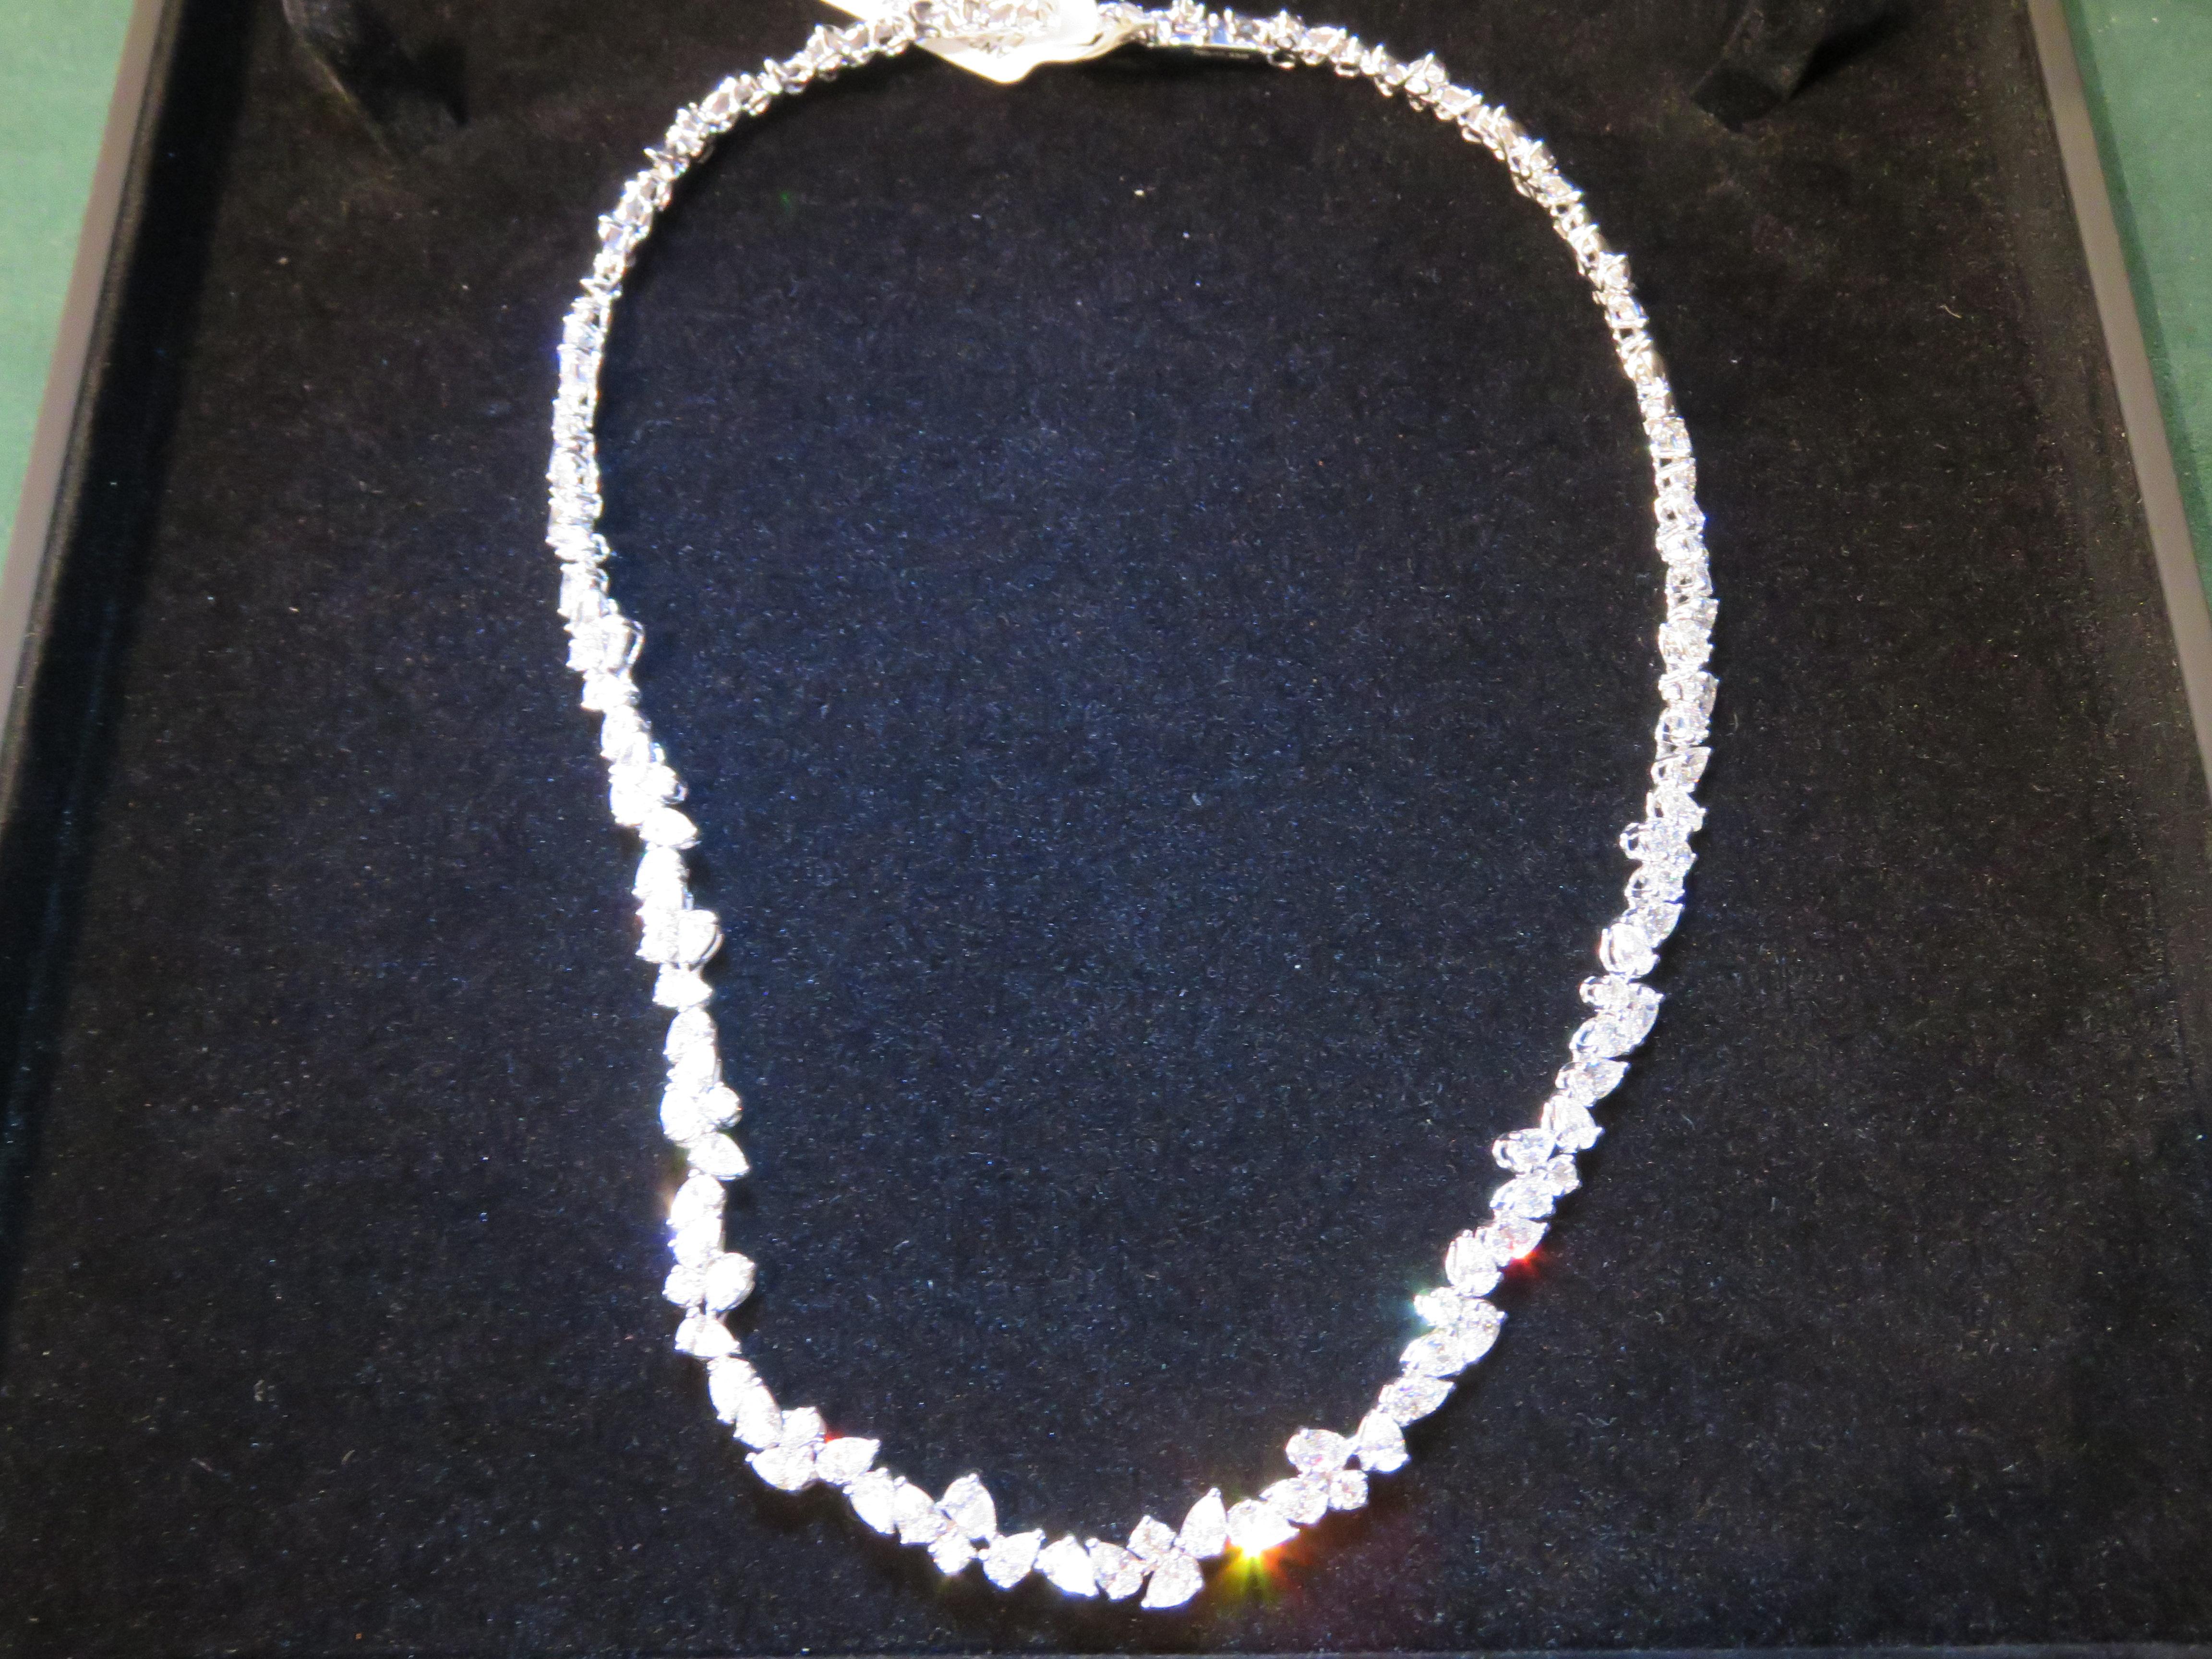 The Following Item we are offering is this Beautiful Rare Important 18KT Gold Gorgeous Glittering Sparkling White Diamond Necklace. Necklace is comprised of Large Pear Shaped Diamonds adorned with Fine Glittering Round Diamonds!!! The Stones are of